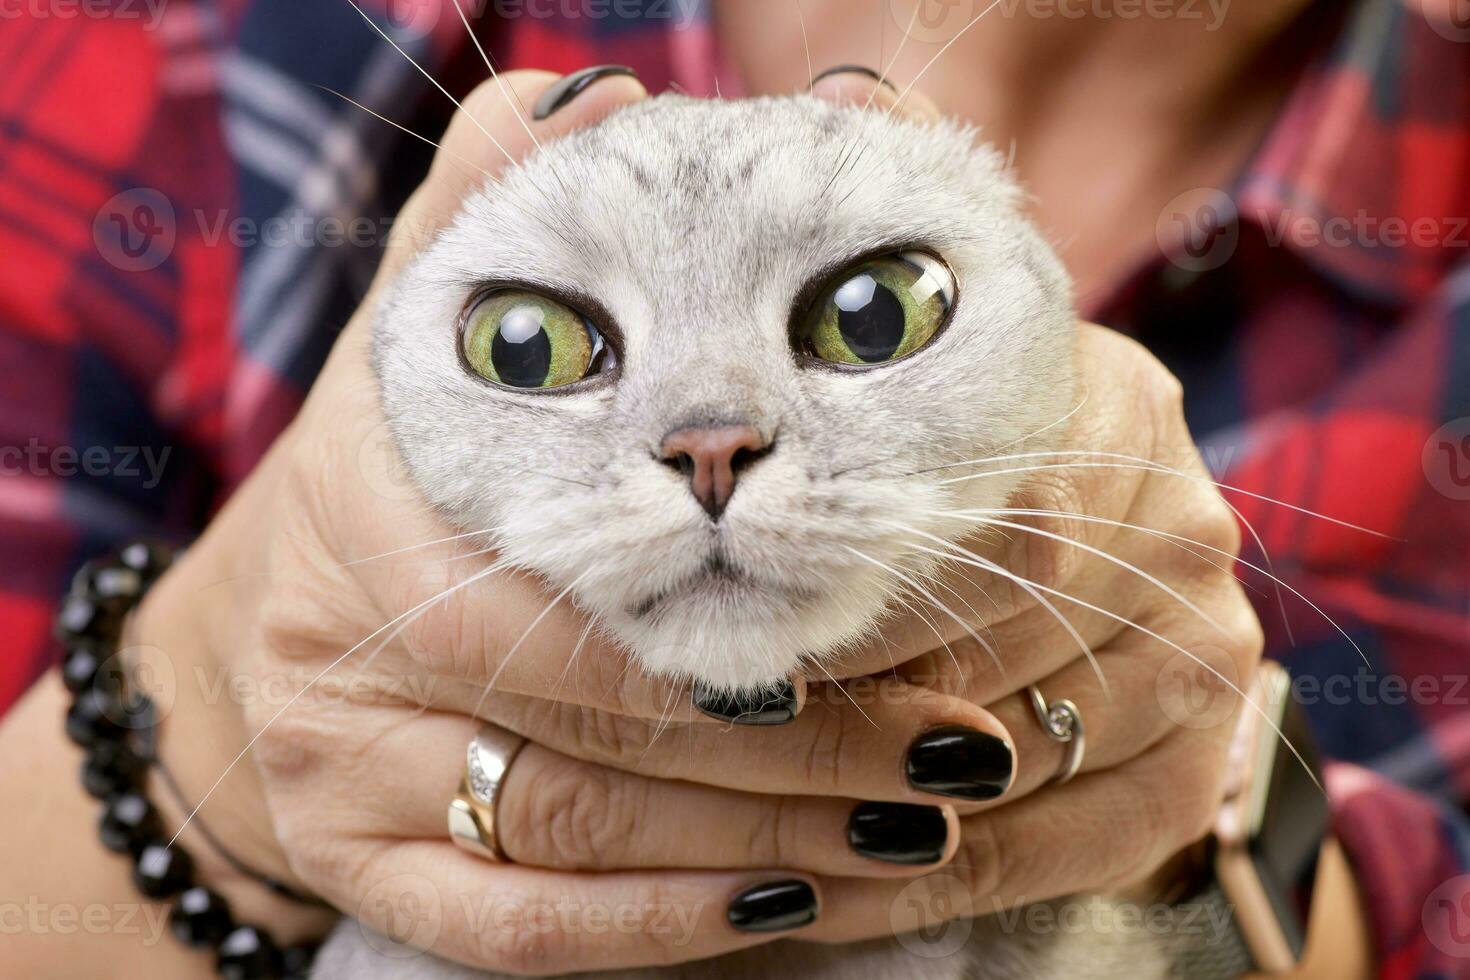 A woman holding an adorable British shorthair cat photo